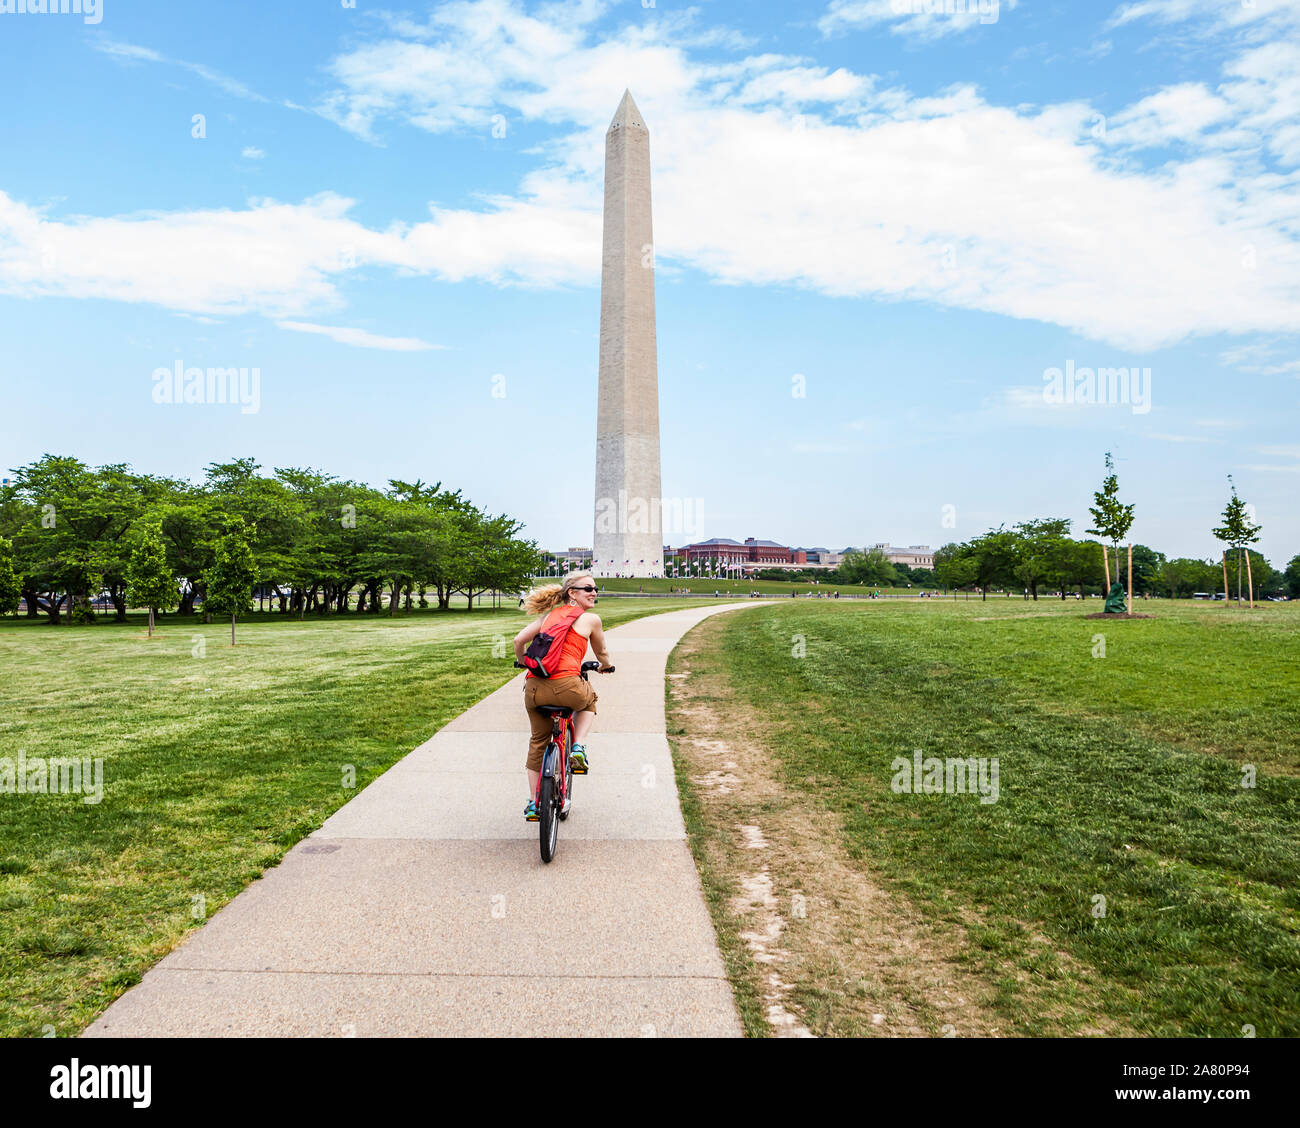 A happy woman riding a bike share bike on the National Mall in Washington D.C., USA. The Washington Monument in the background. Stock Photo